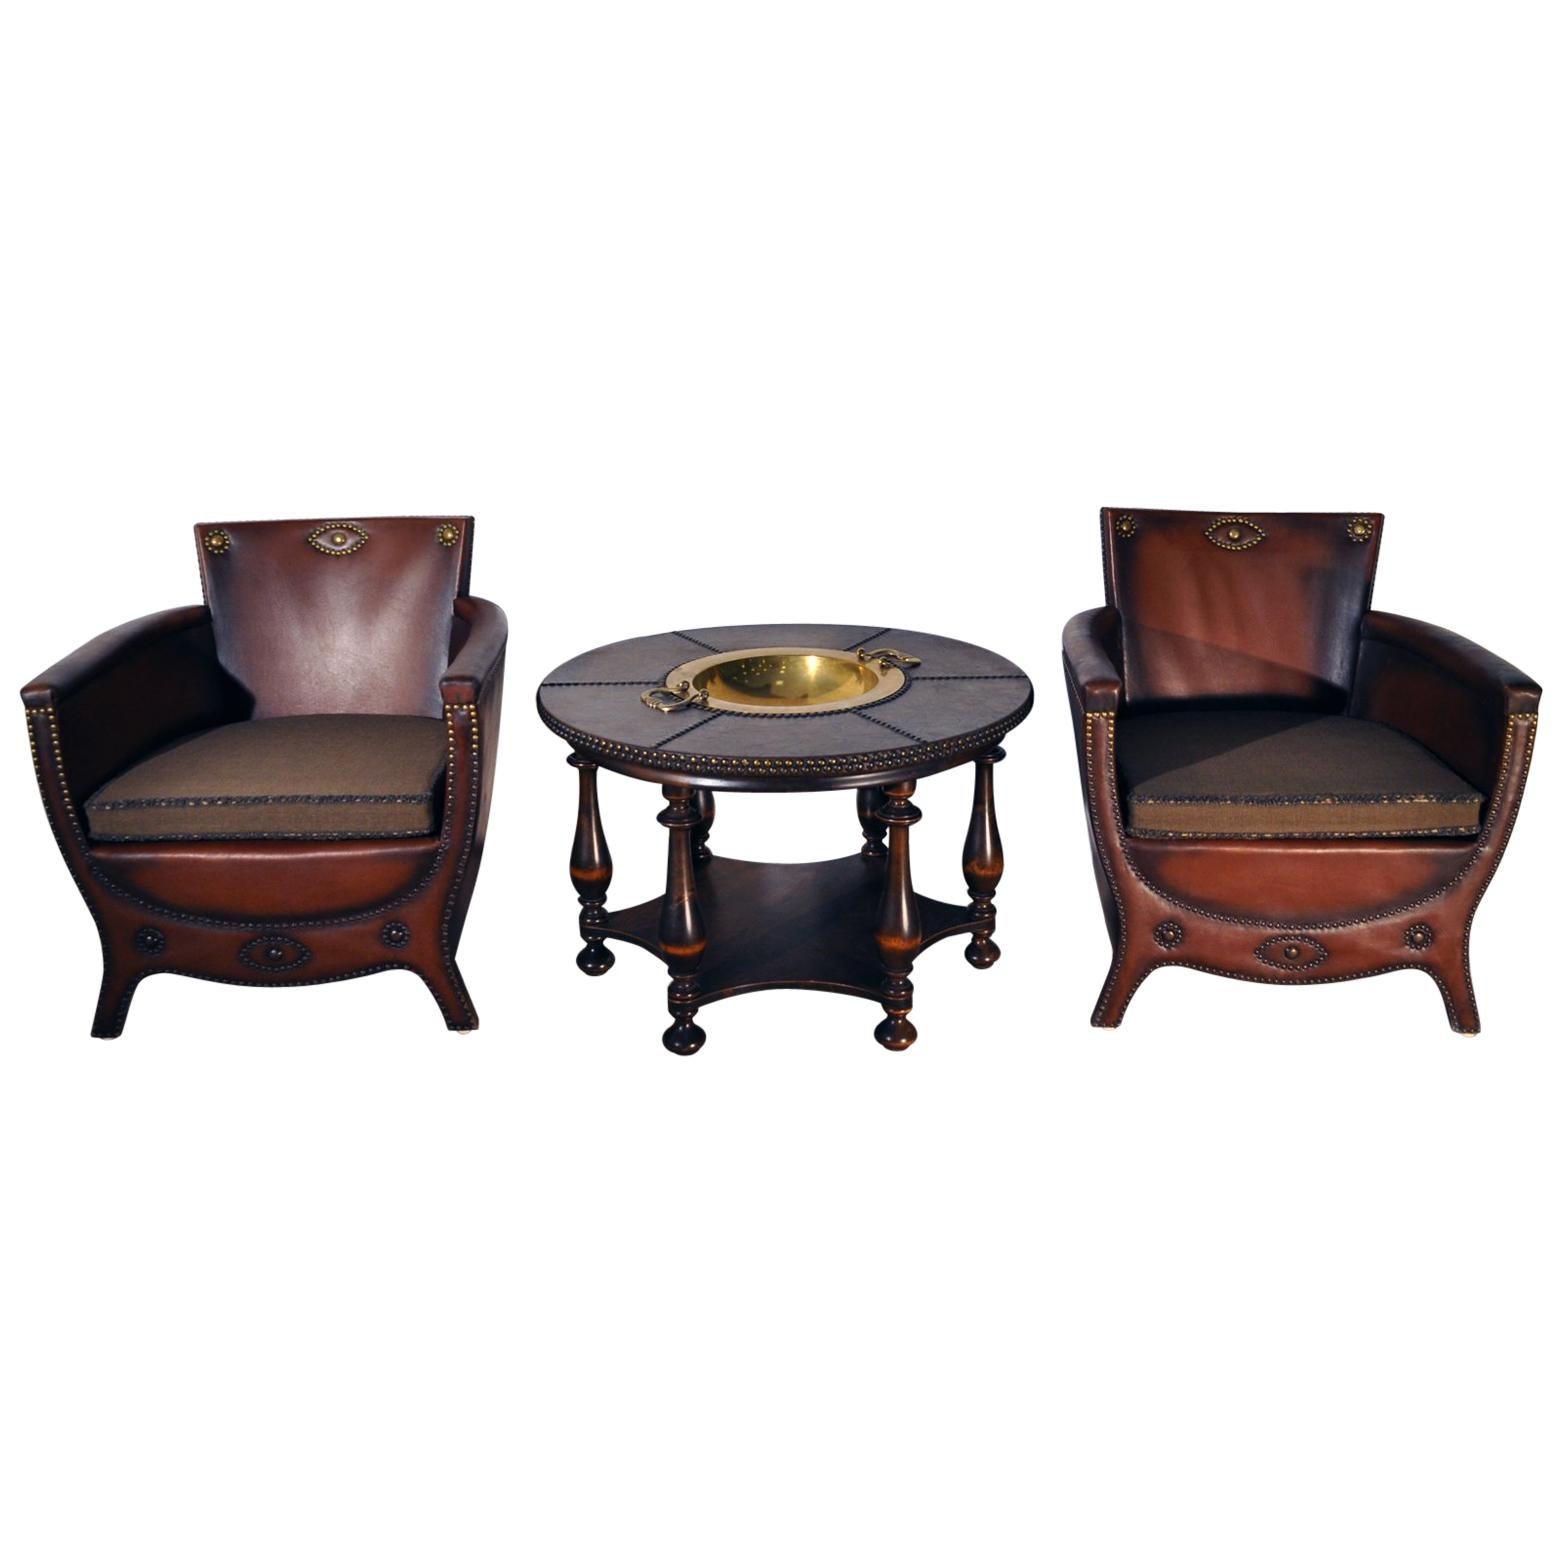 Otto Schulz Lounge Chairs and Table with Original Leather, Sweden, 1930s For Sale